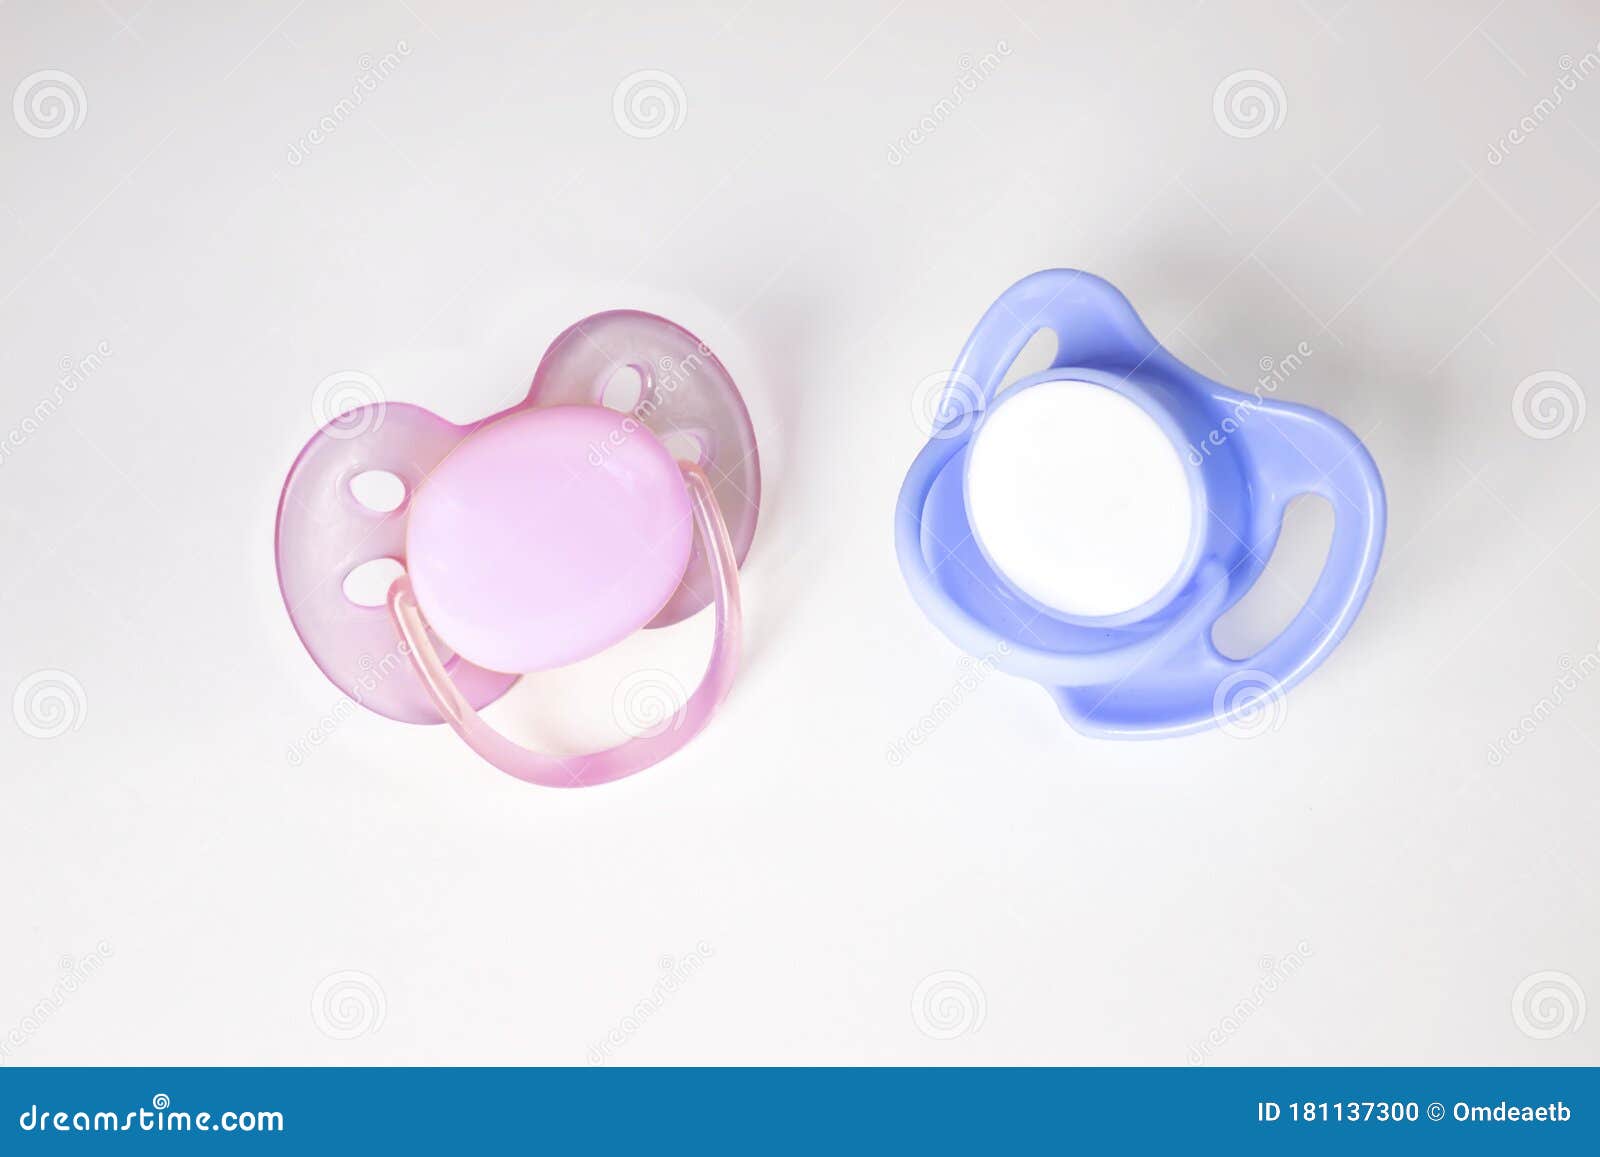 Pink and Blue Pacifiers on a White Background. Two Pacifiers Close-up ...